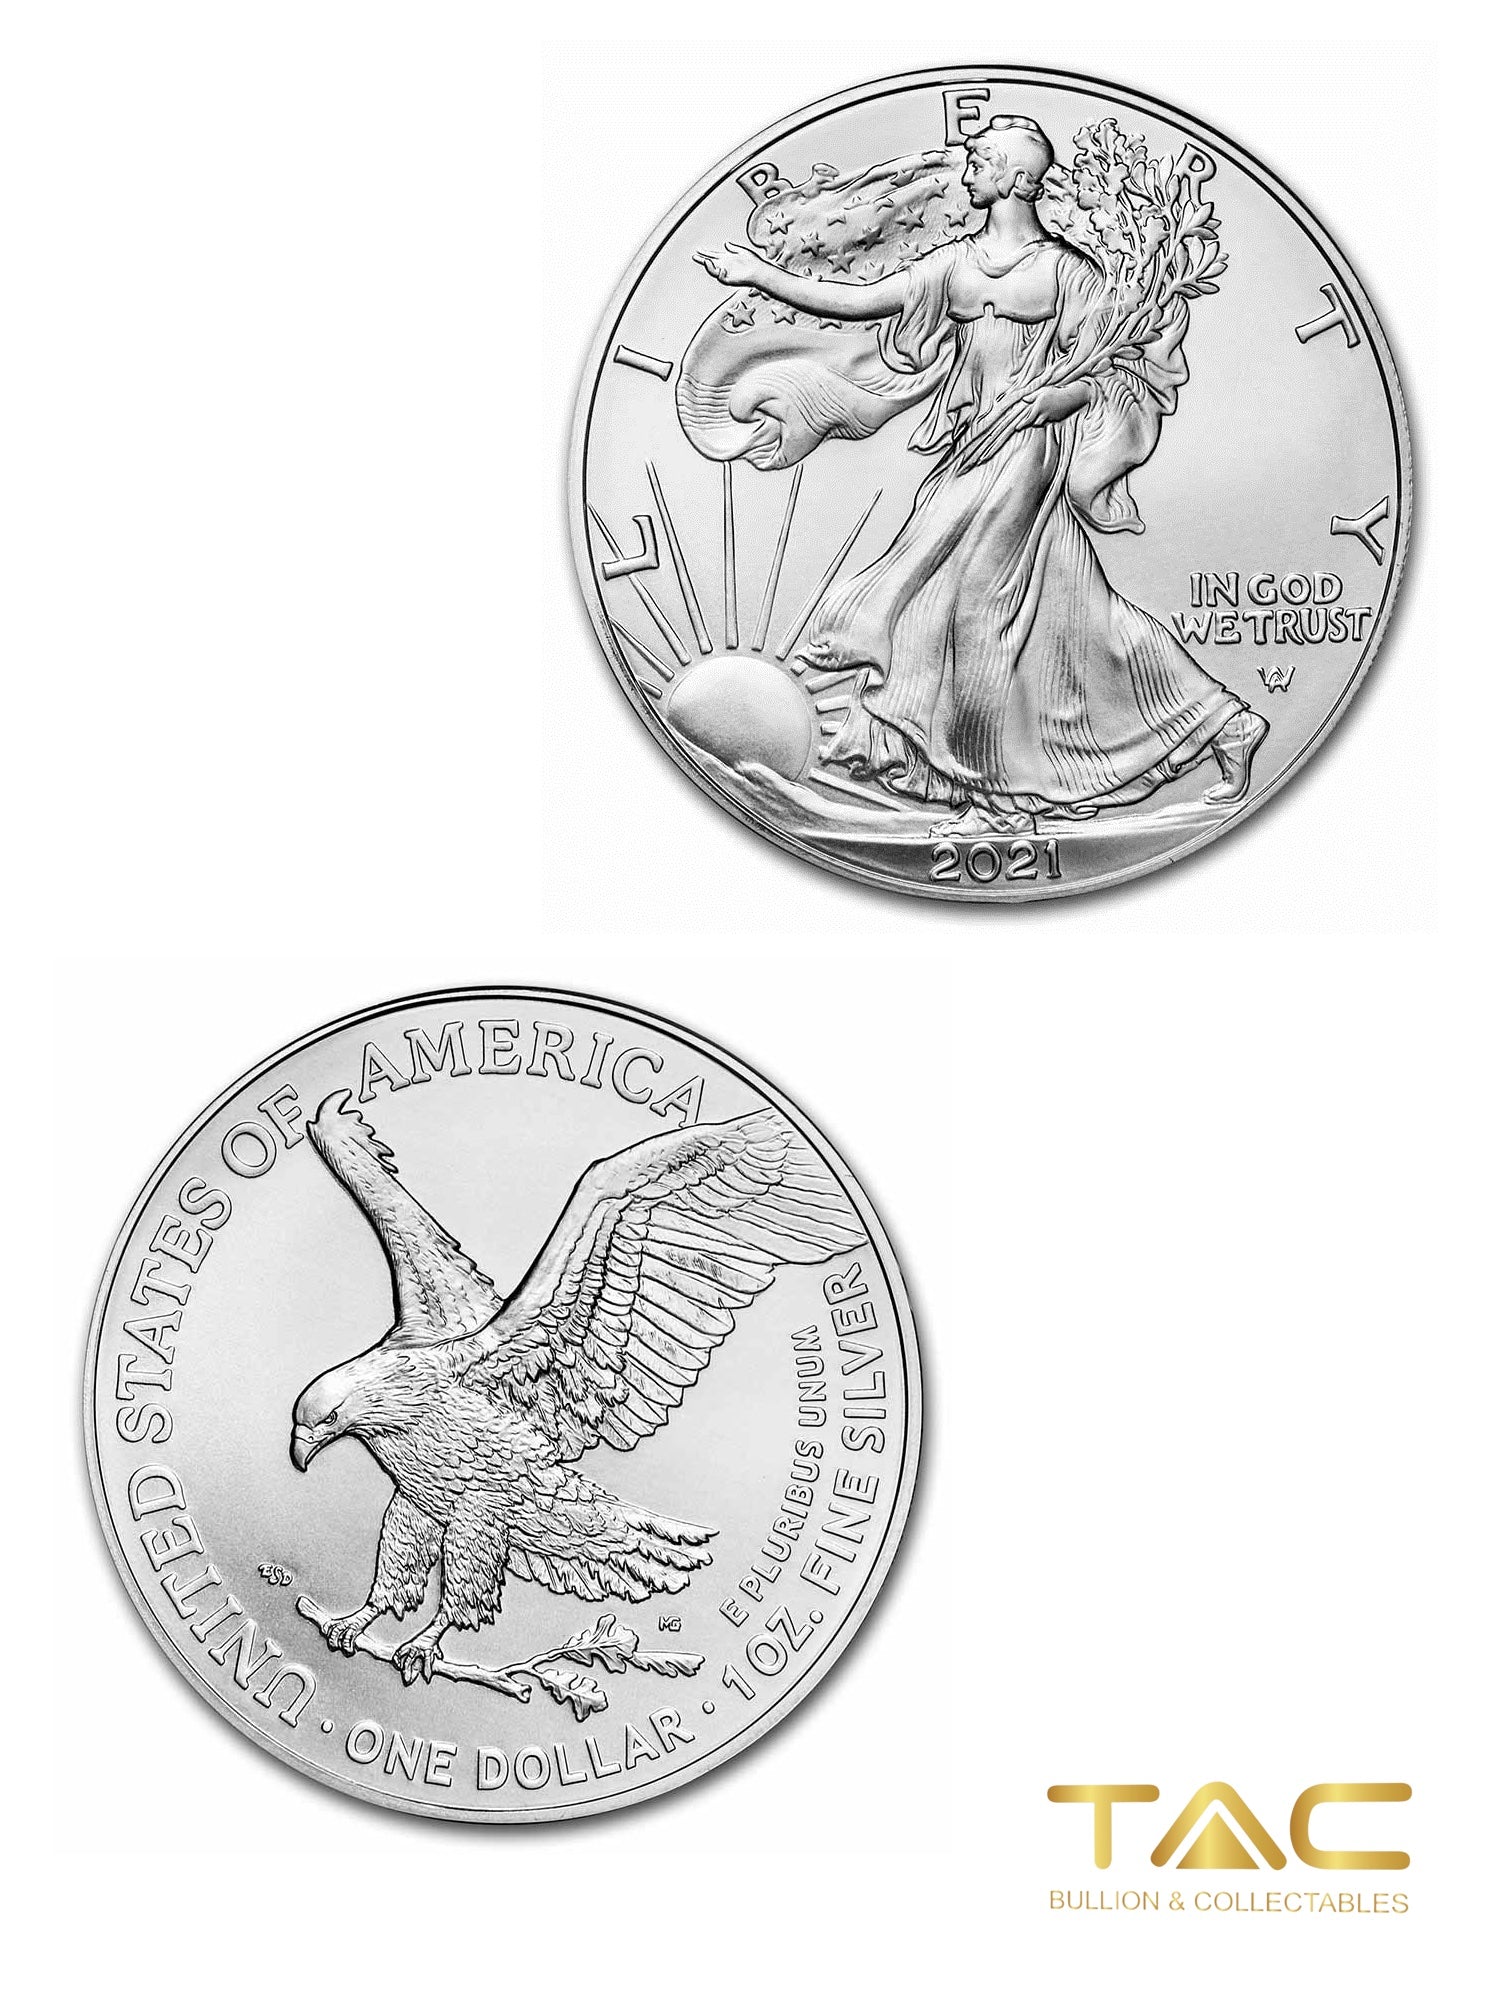 1 oz Silver Coin - 2021 American Silver Eagle - US Mint - Type 2